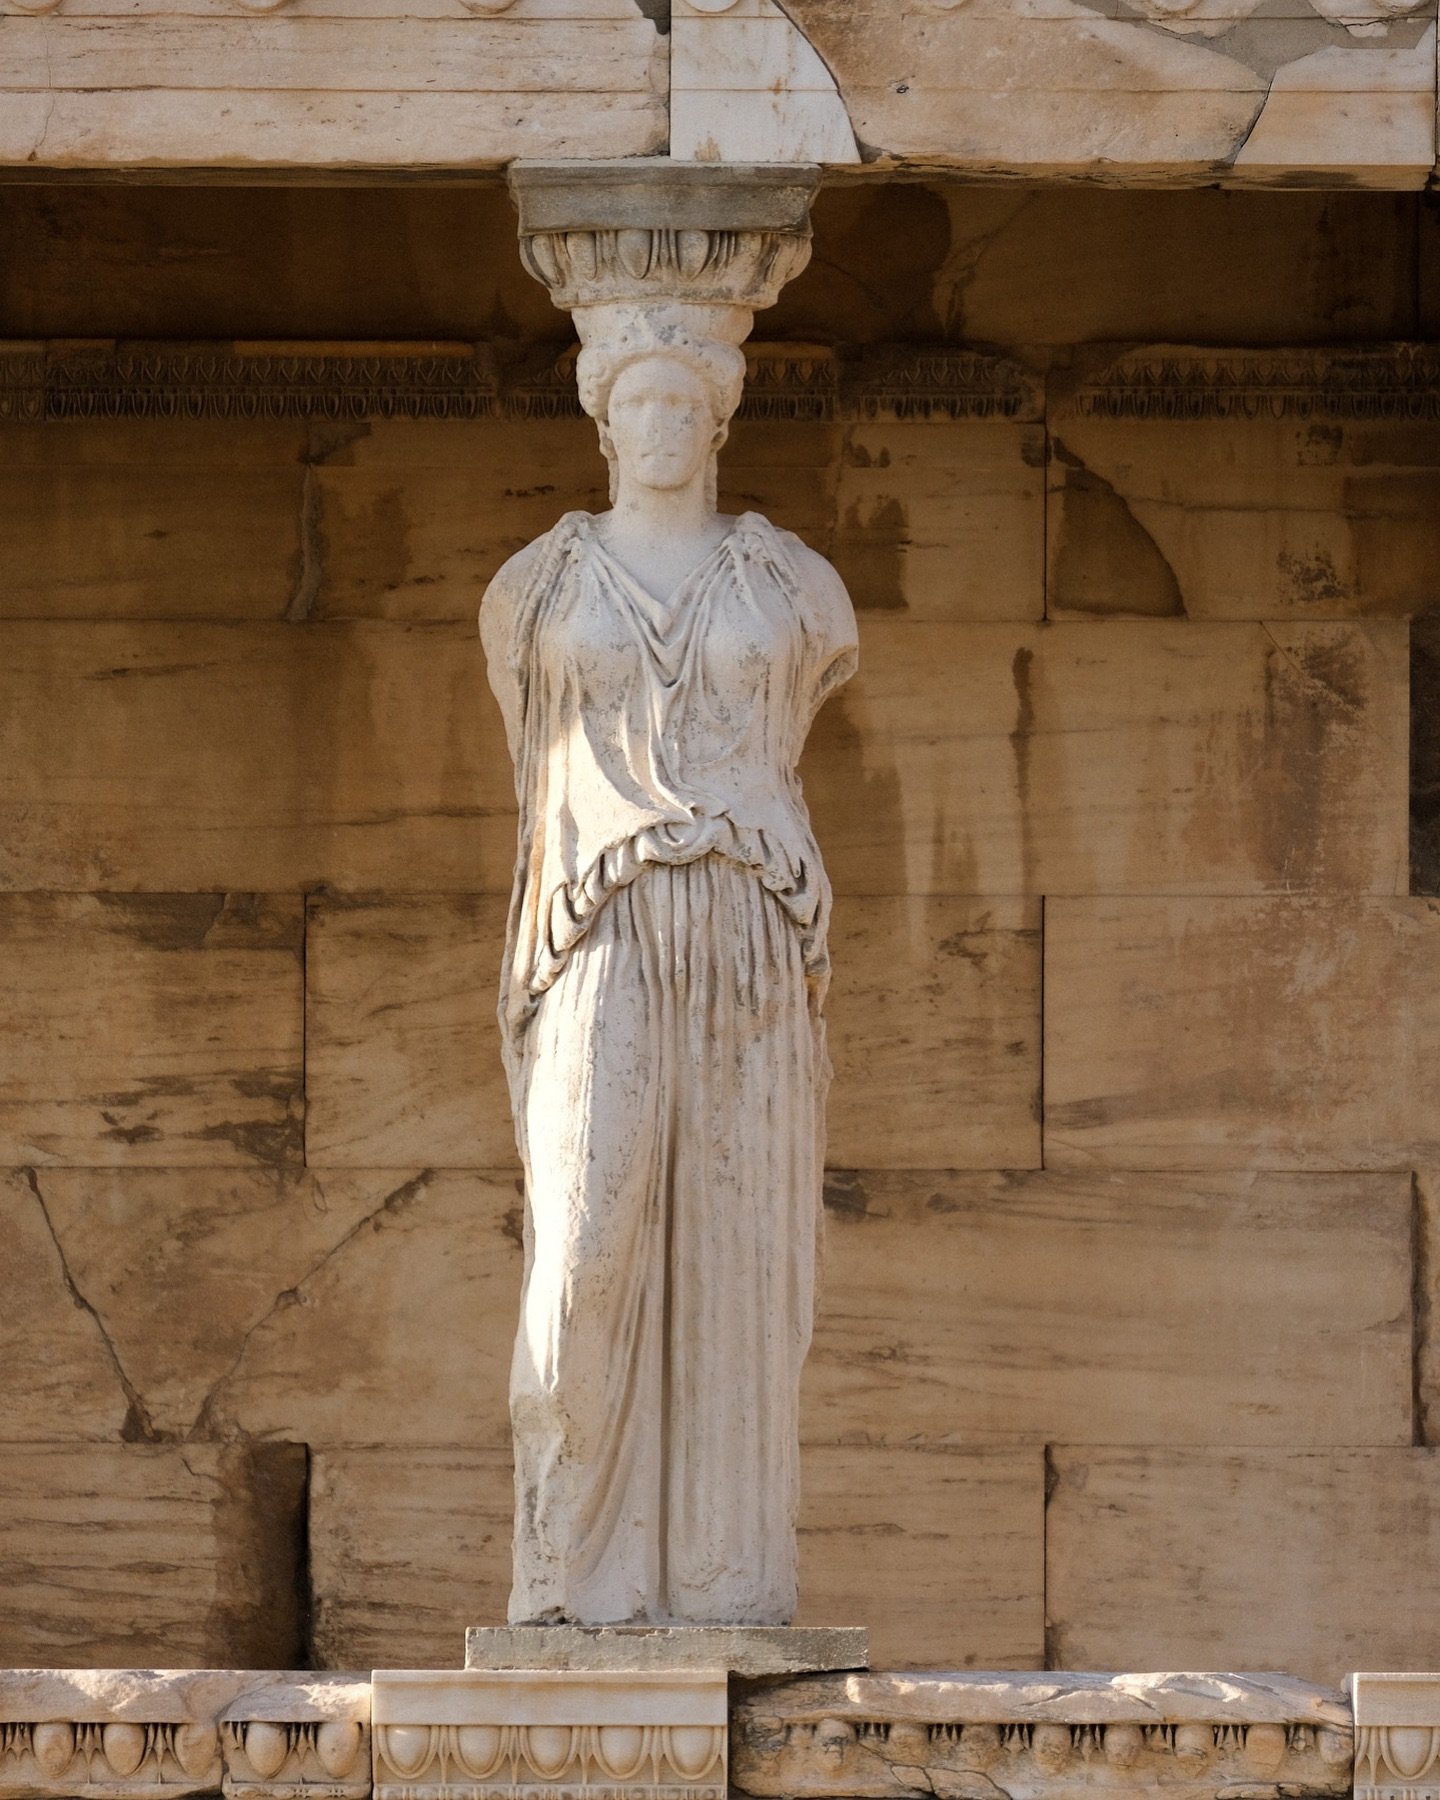 An ancient statue so powerful at the temple of goddess Athena - The Akropolis is definitely our favourite place to see the sun setting down over the whole city of Athens. 

#akropolis #athena #athens #greece